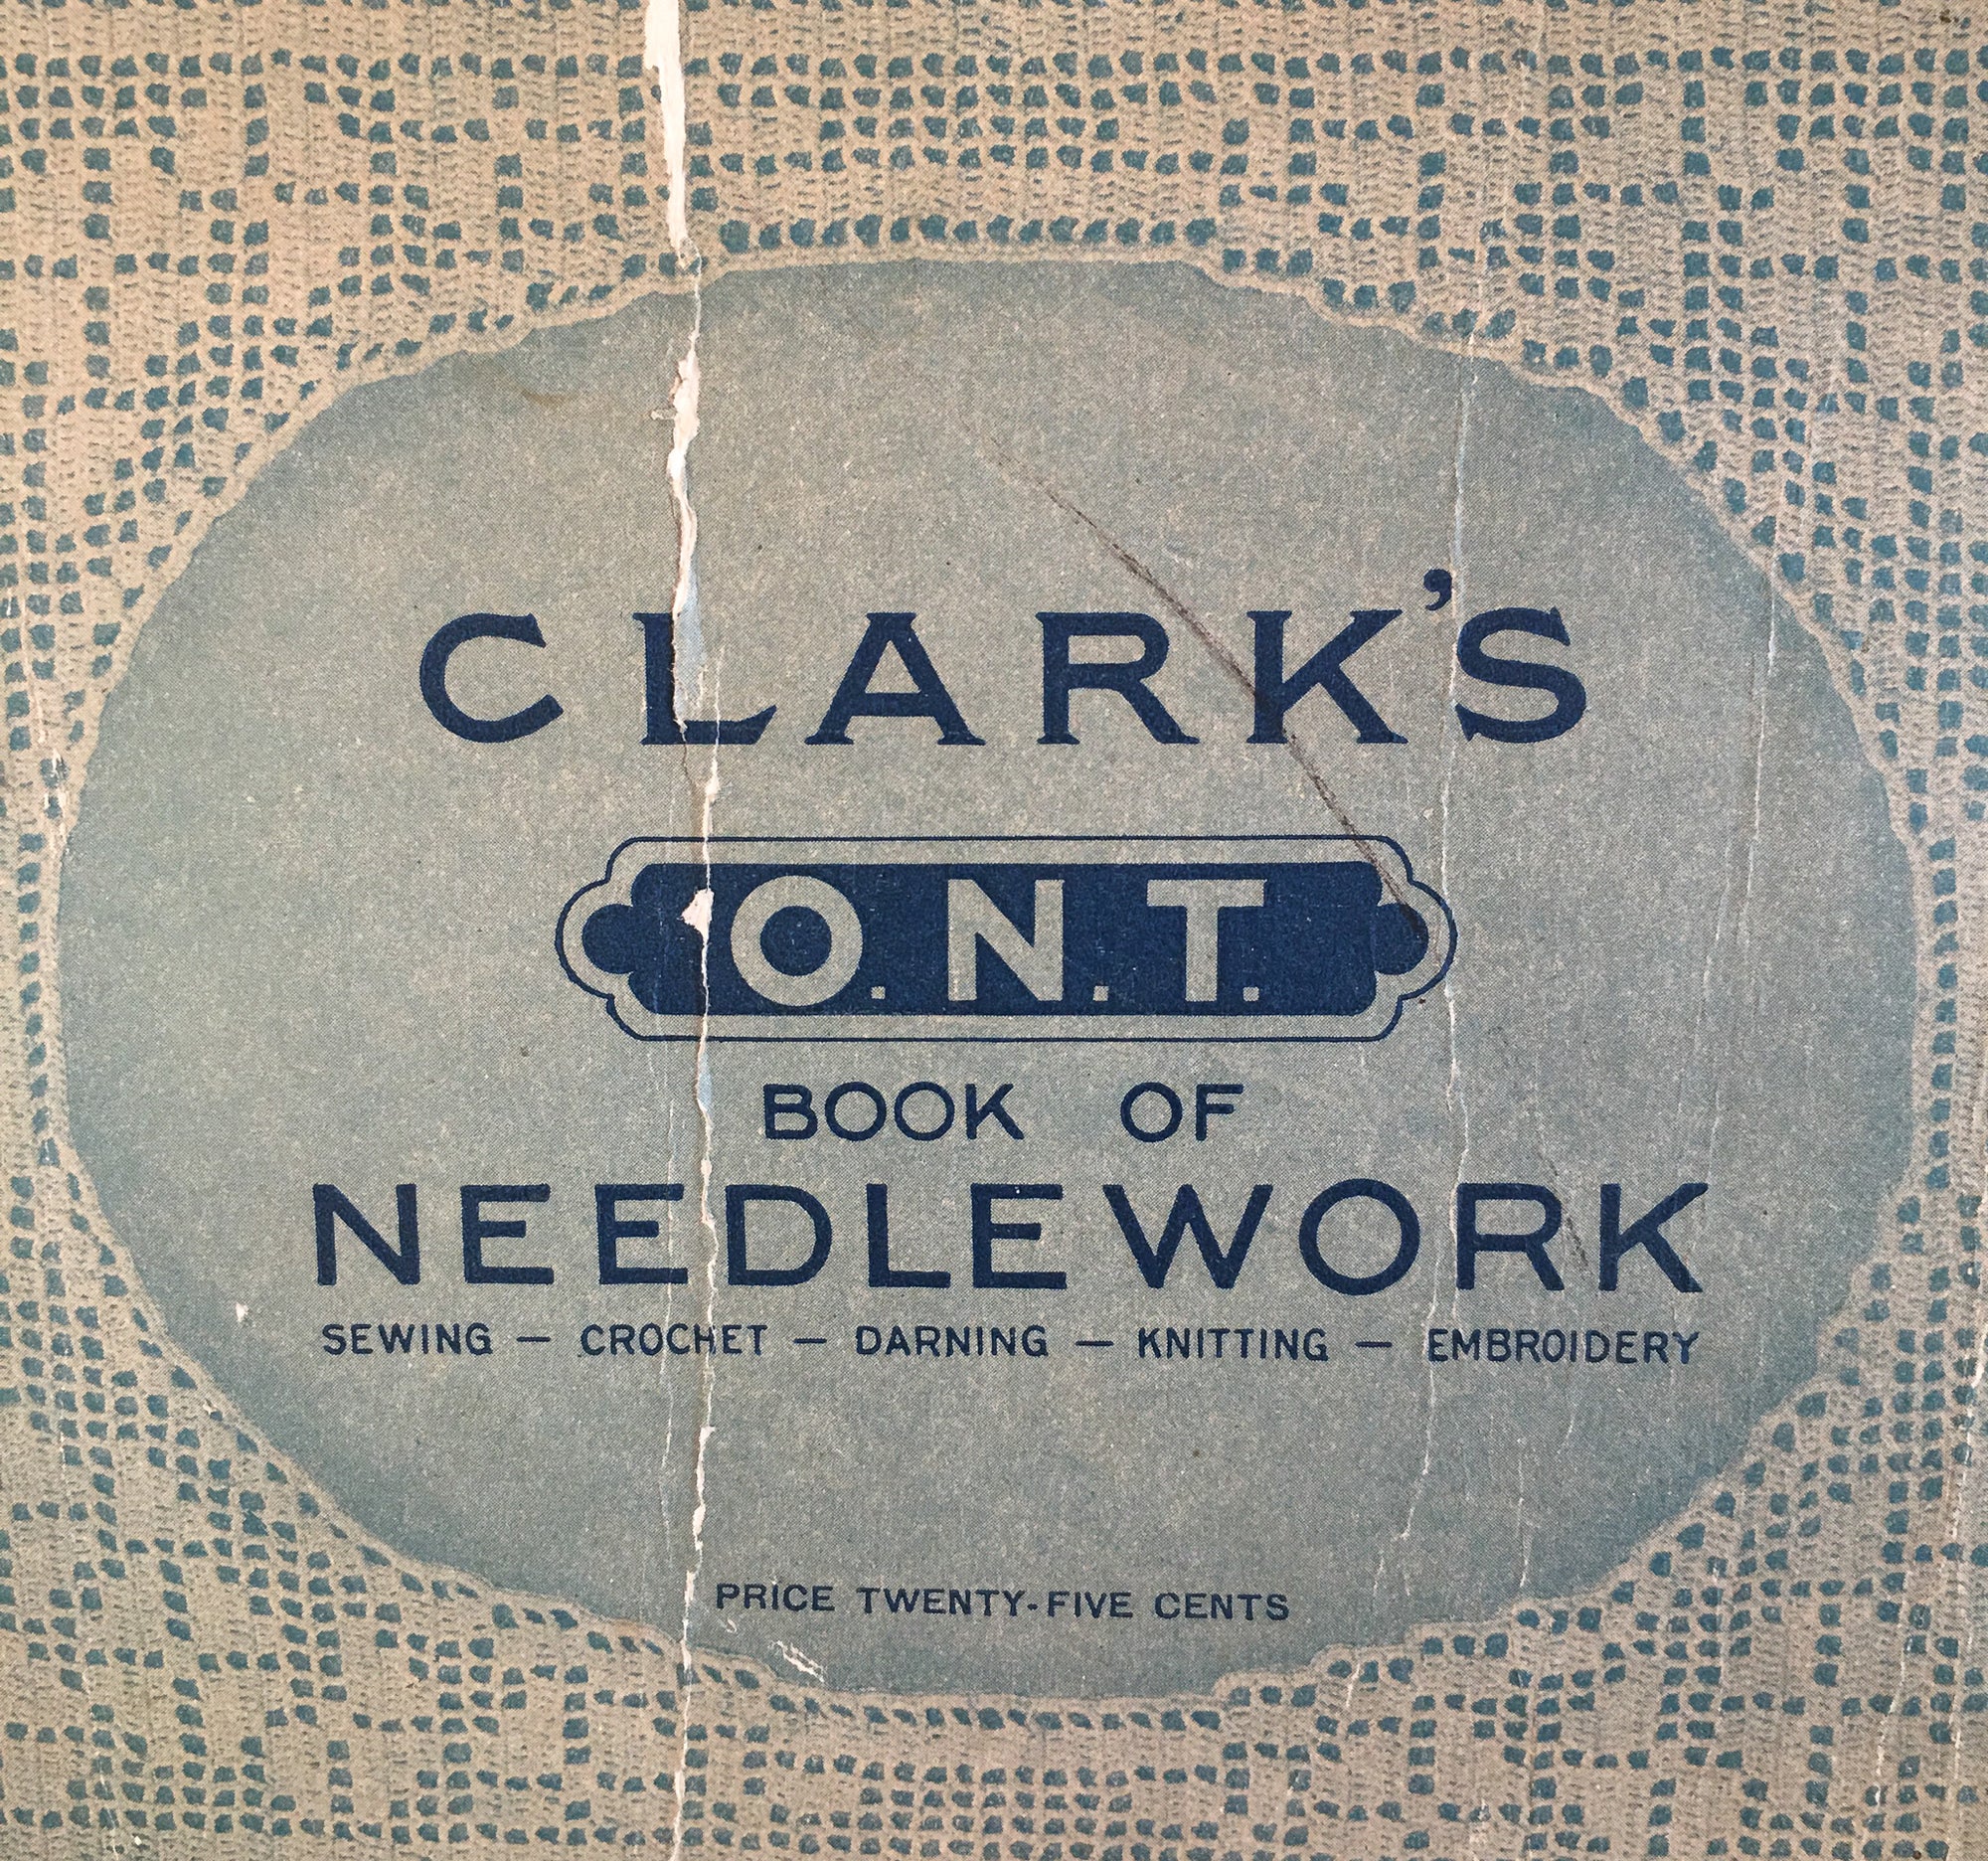 1916 Clark’s Book of Needlework and Clark’s O.N.T. Thread Box with 6 Spools Black Thread